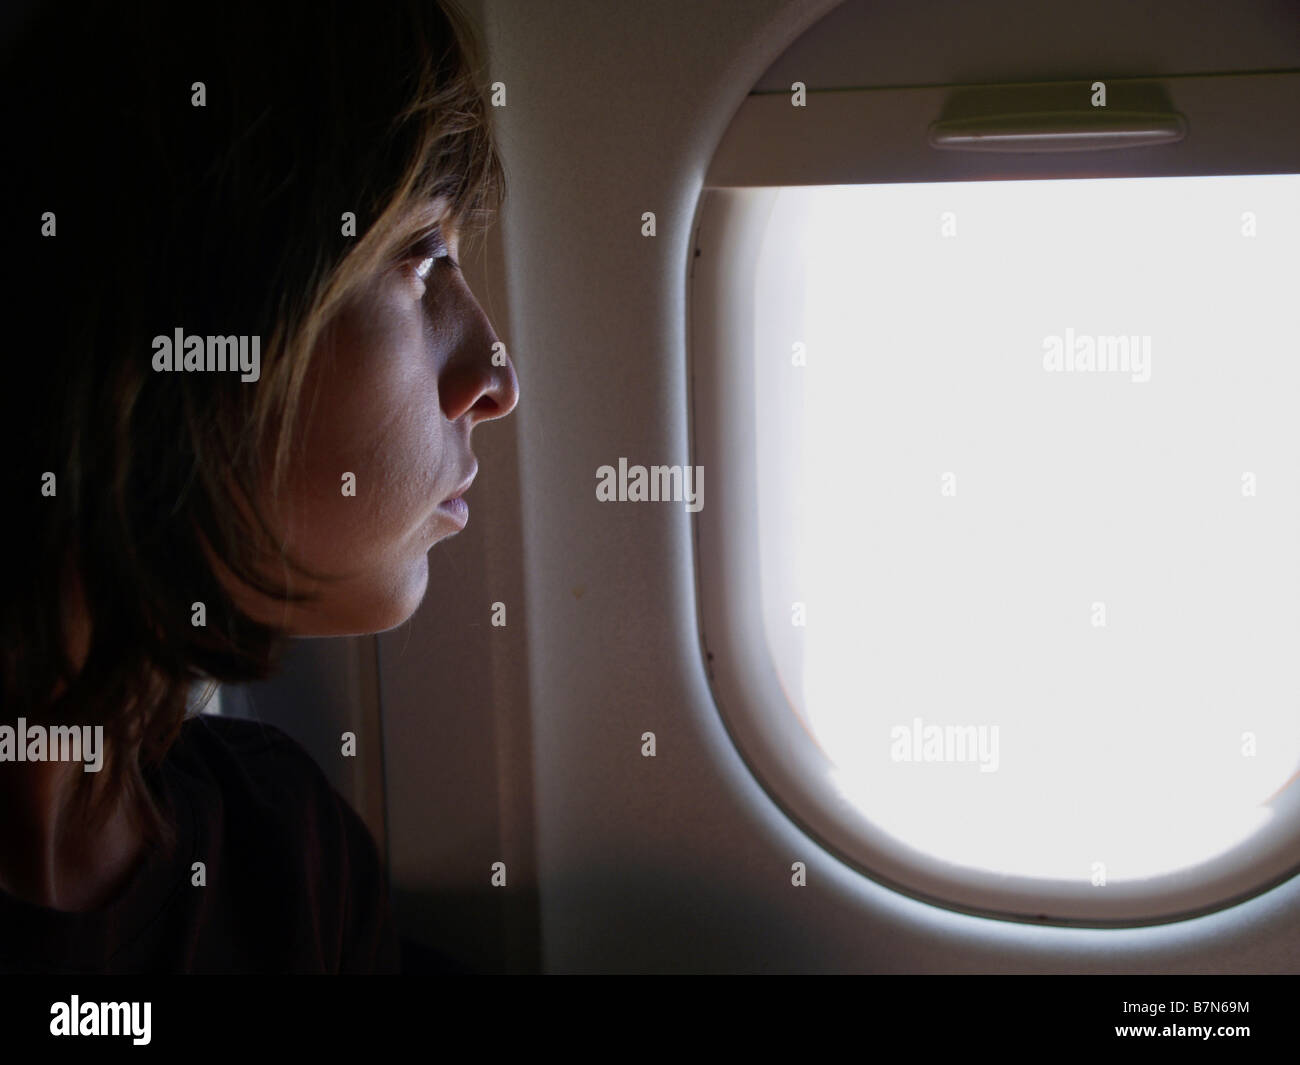 Woman looking apprehensively out airplane window during transatlantic flight. Stock Photo